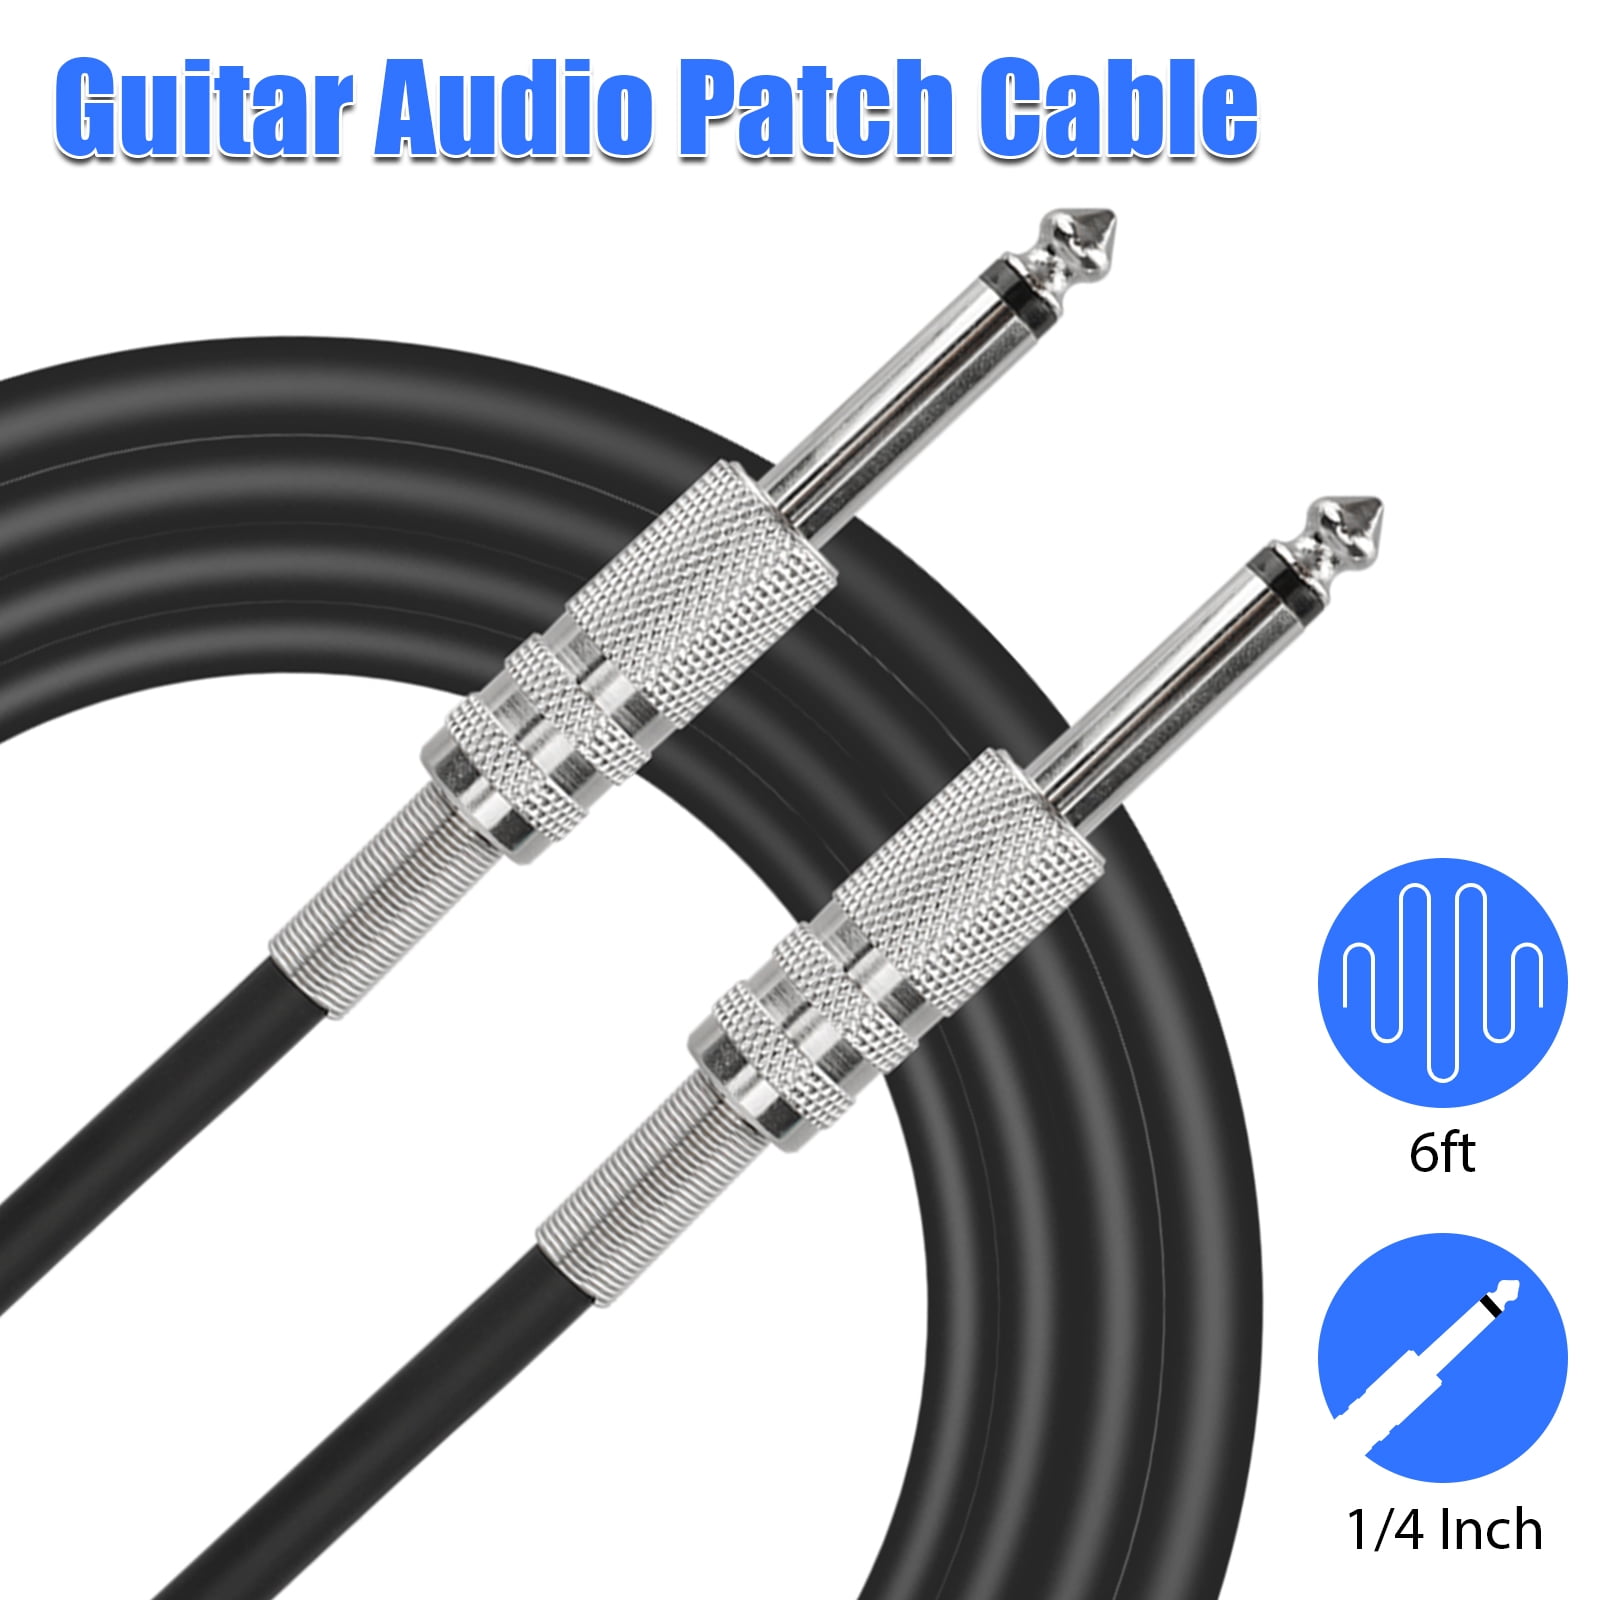 Bass Amplifier Keyboard Bstxnwen Guitar Cable 6ft 1/4 inch TS Right Angle to Straight Guitar Instrument Cord Electric Guitar Cable Professional Instrument Cable for Electric Guitar 